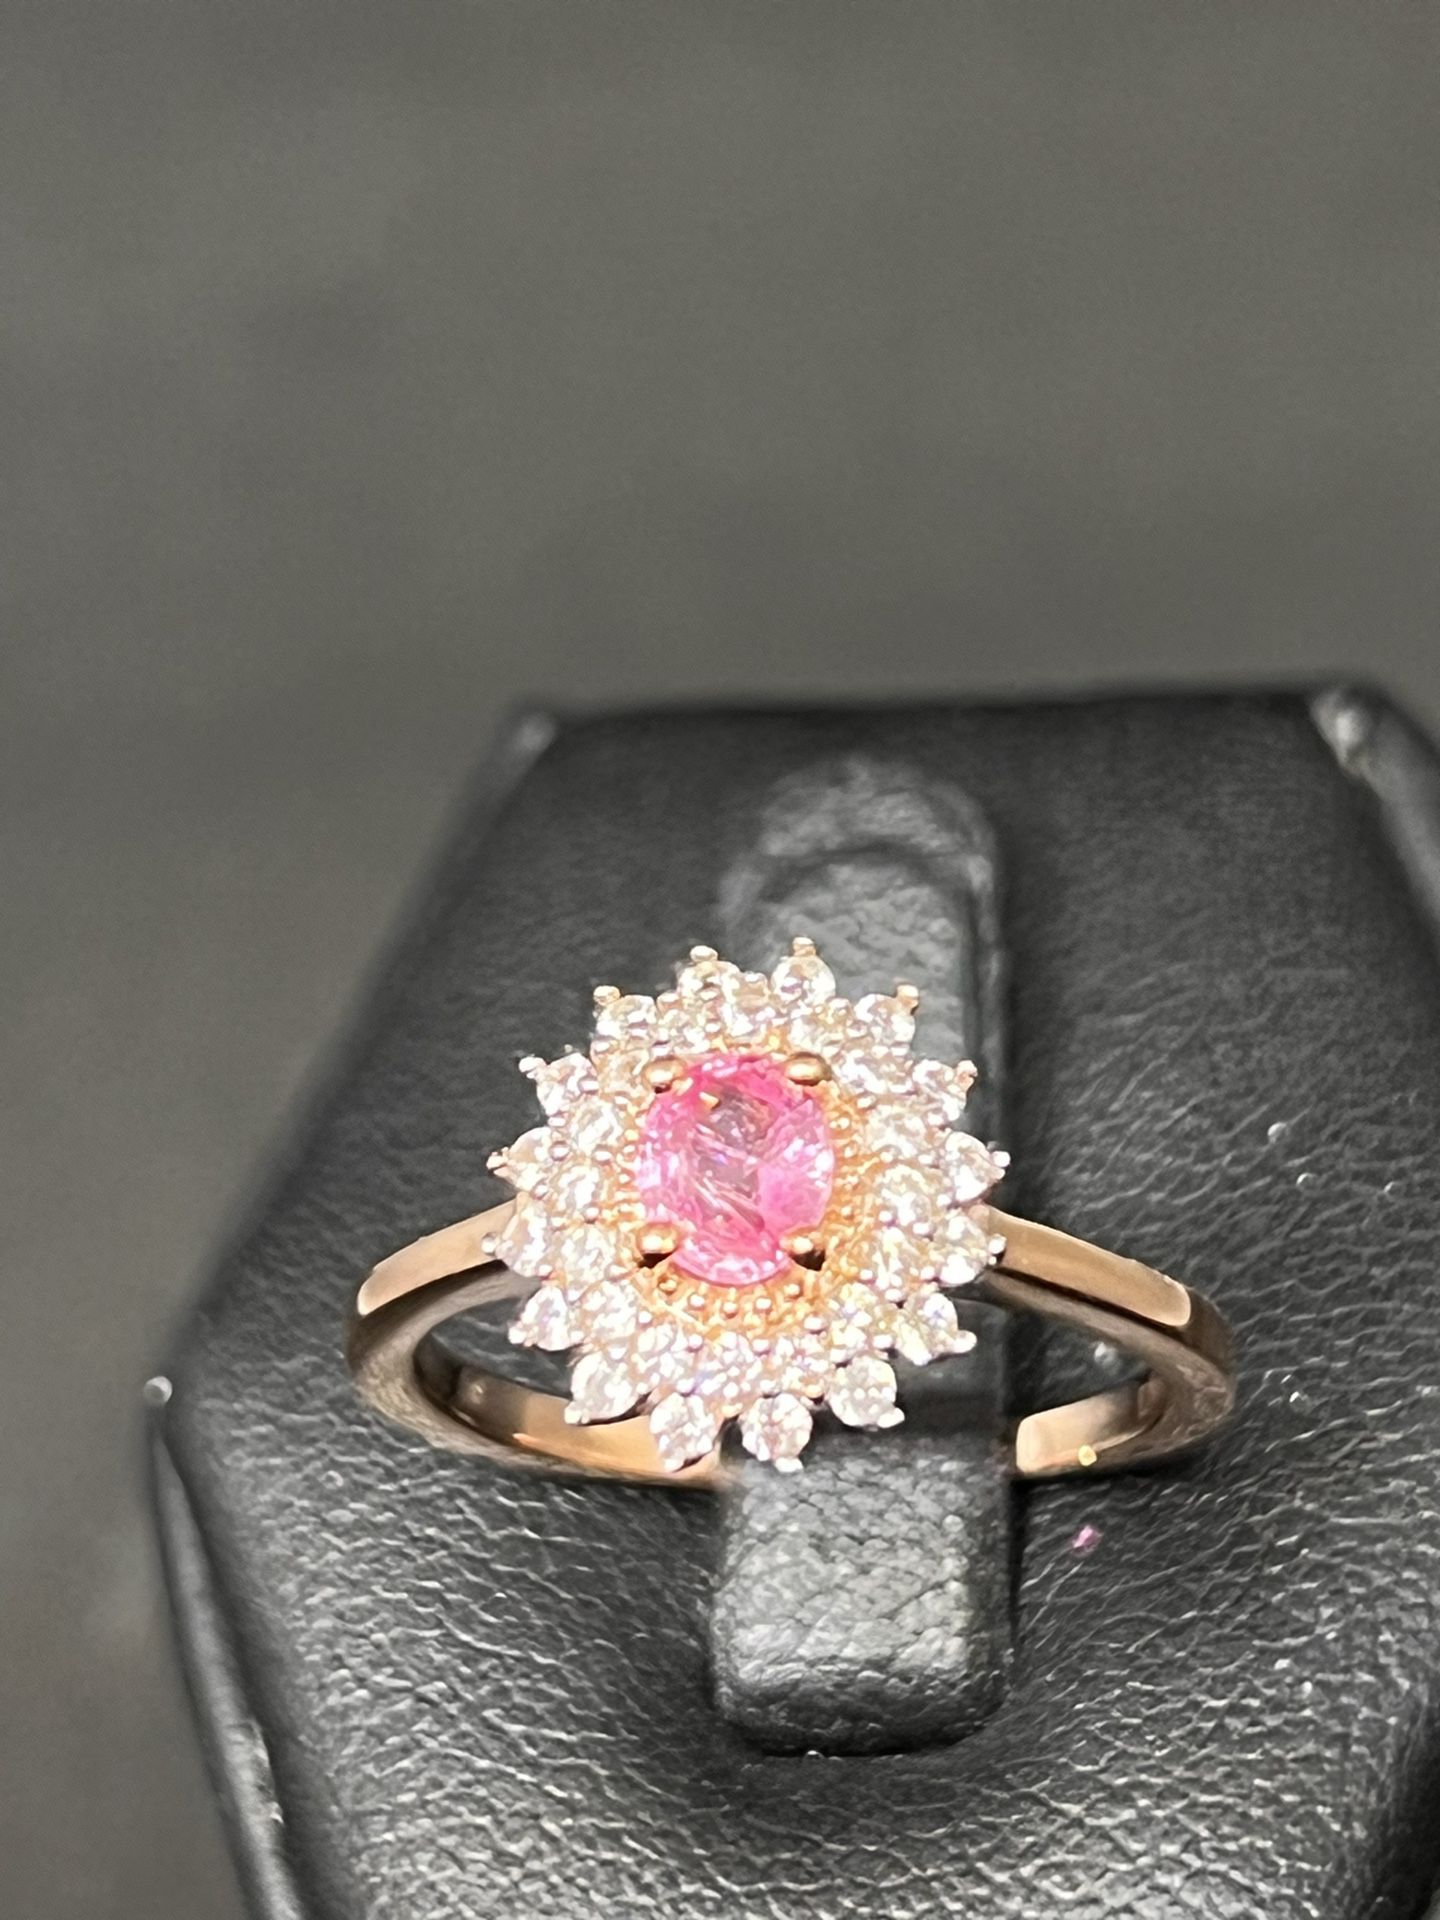 Real Pink Sapphire Ring